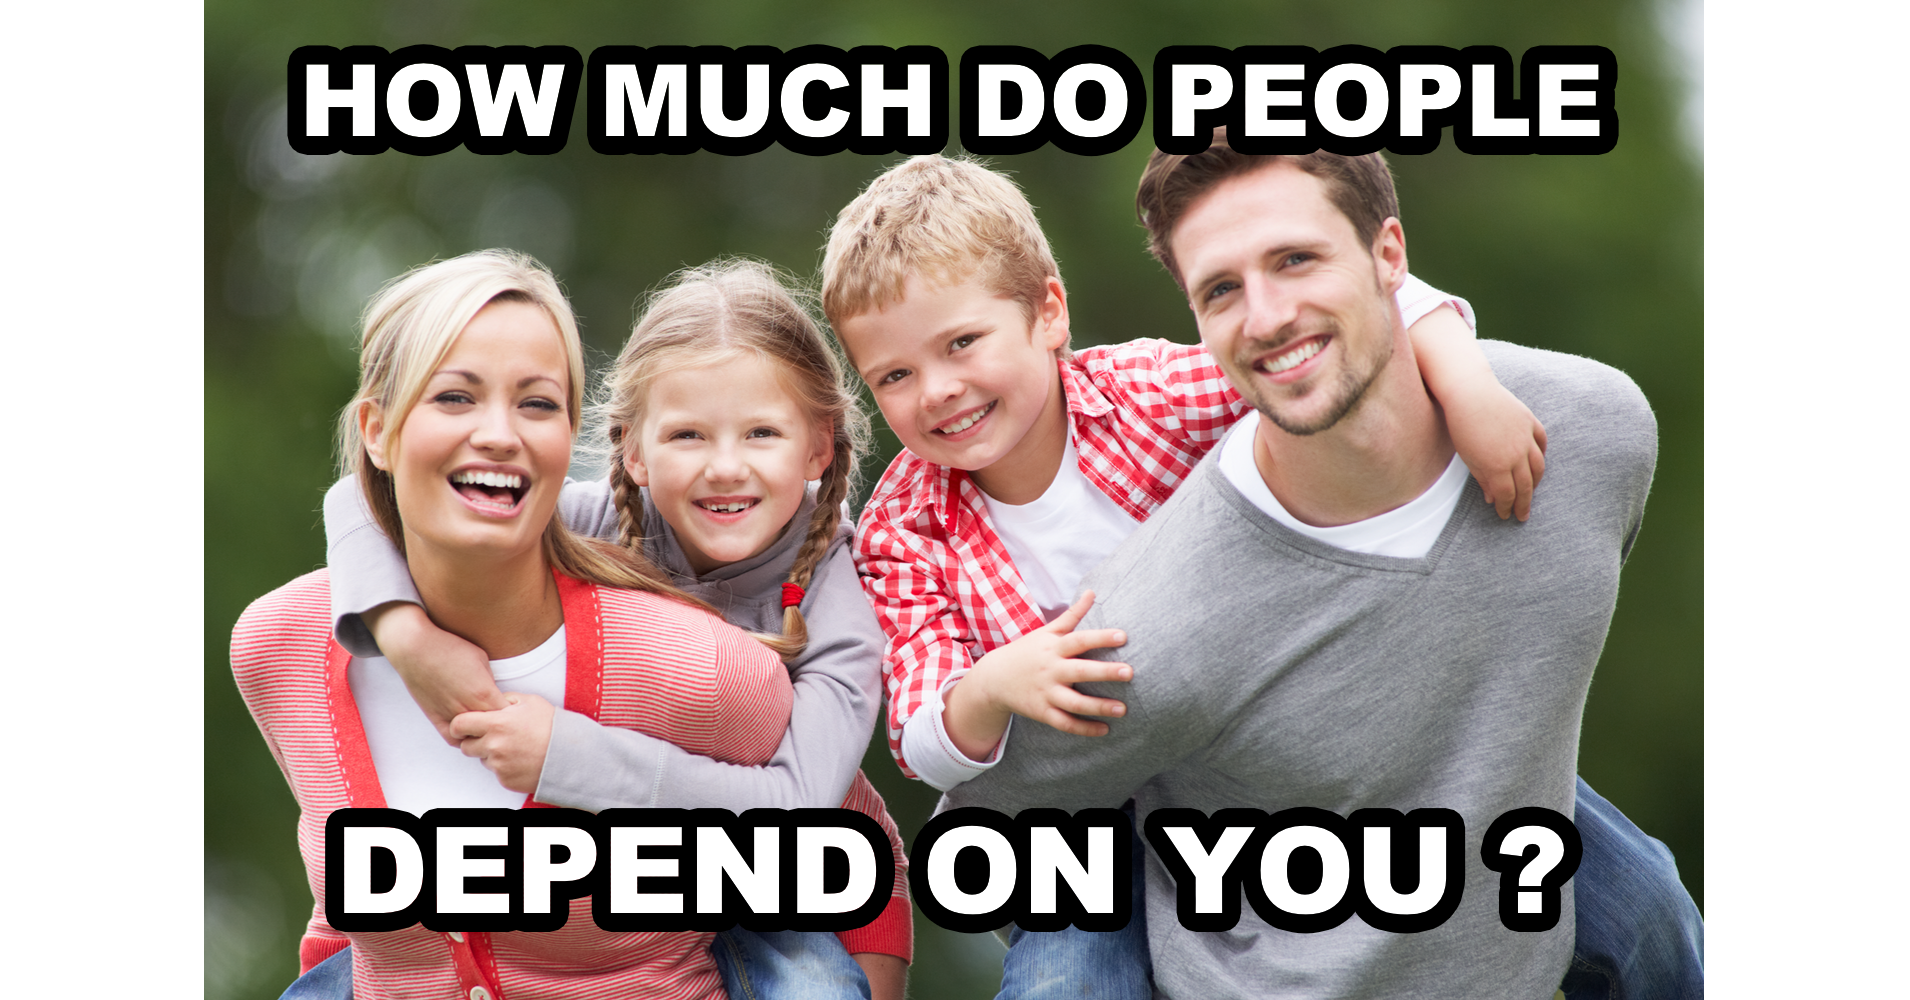 How Much Do People Depend On You?